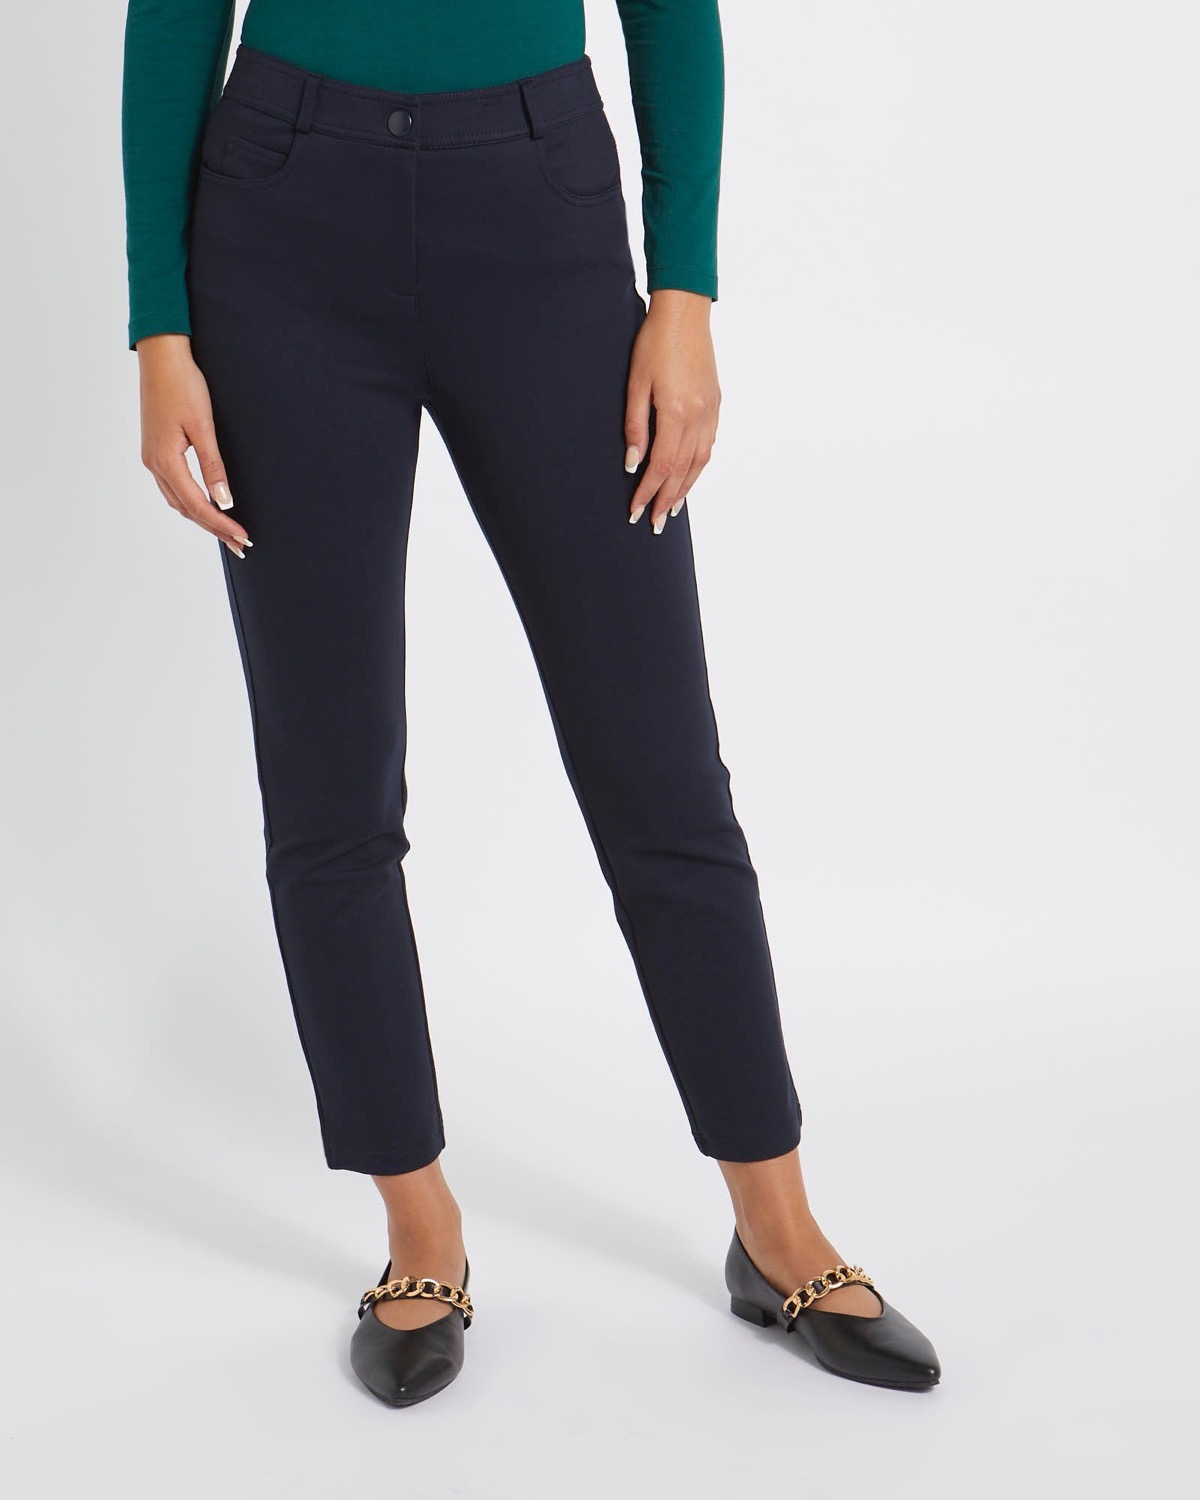 https://dunnes.btxmedia.com/pws/client/images/catalogue/products/8516704/zoom/8516704_navy.jpg